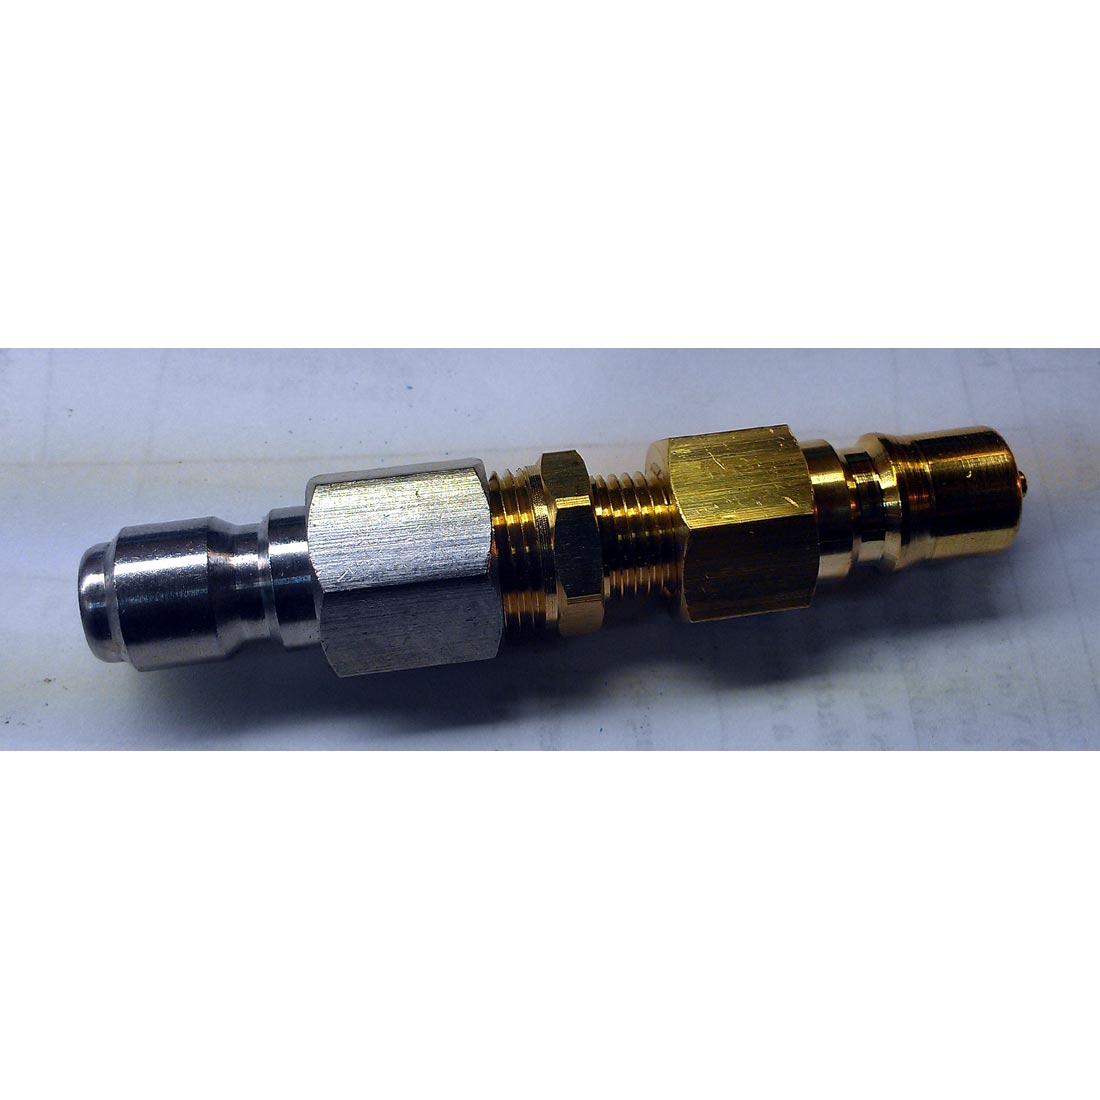 Carpet Cleaning 1/4in Fip Brass Male Nipple Stop Plug, TO Pressure Washing QD, 3/8in Fip X 3/8in Male Plug Nipple, 20141218